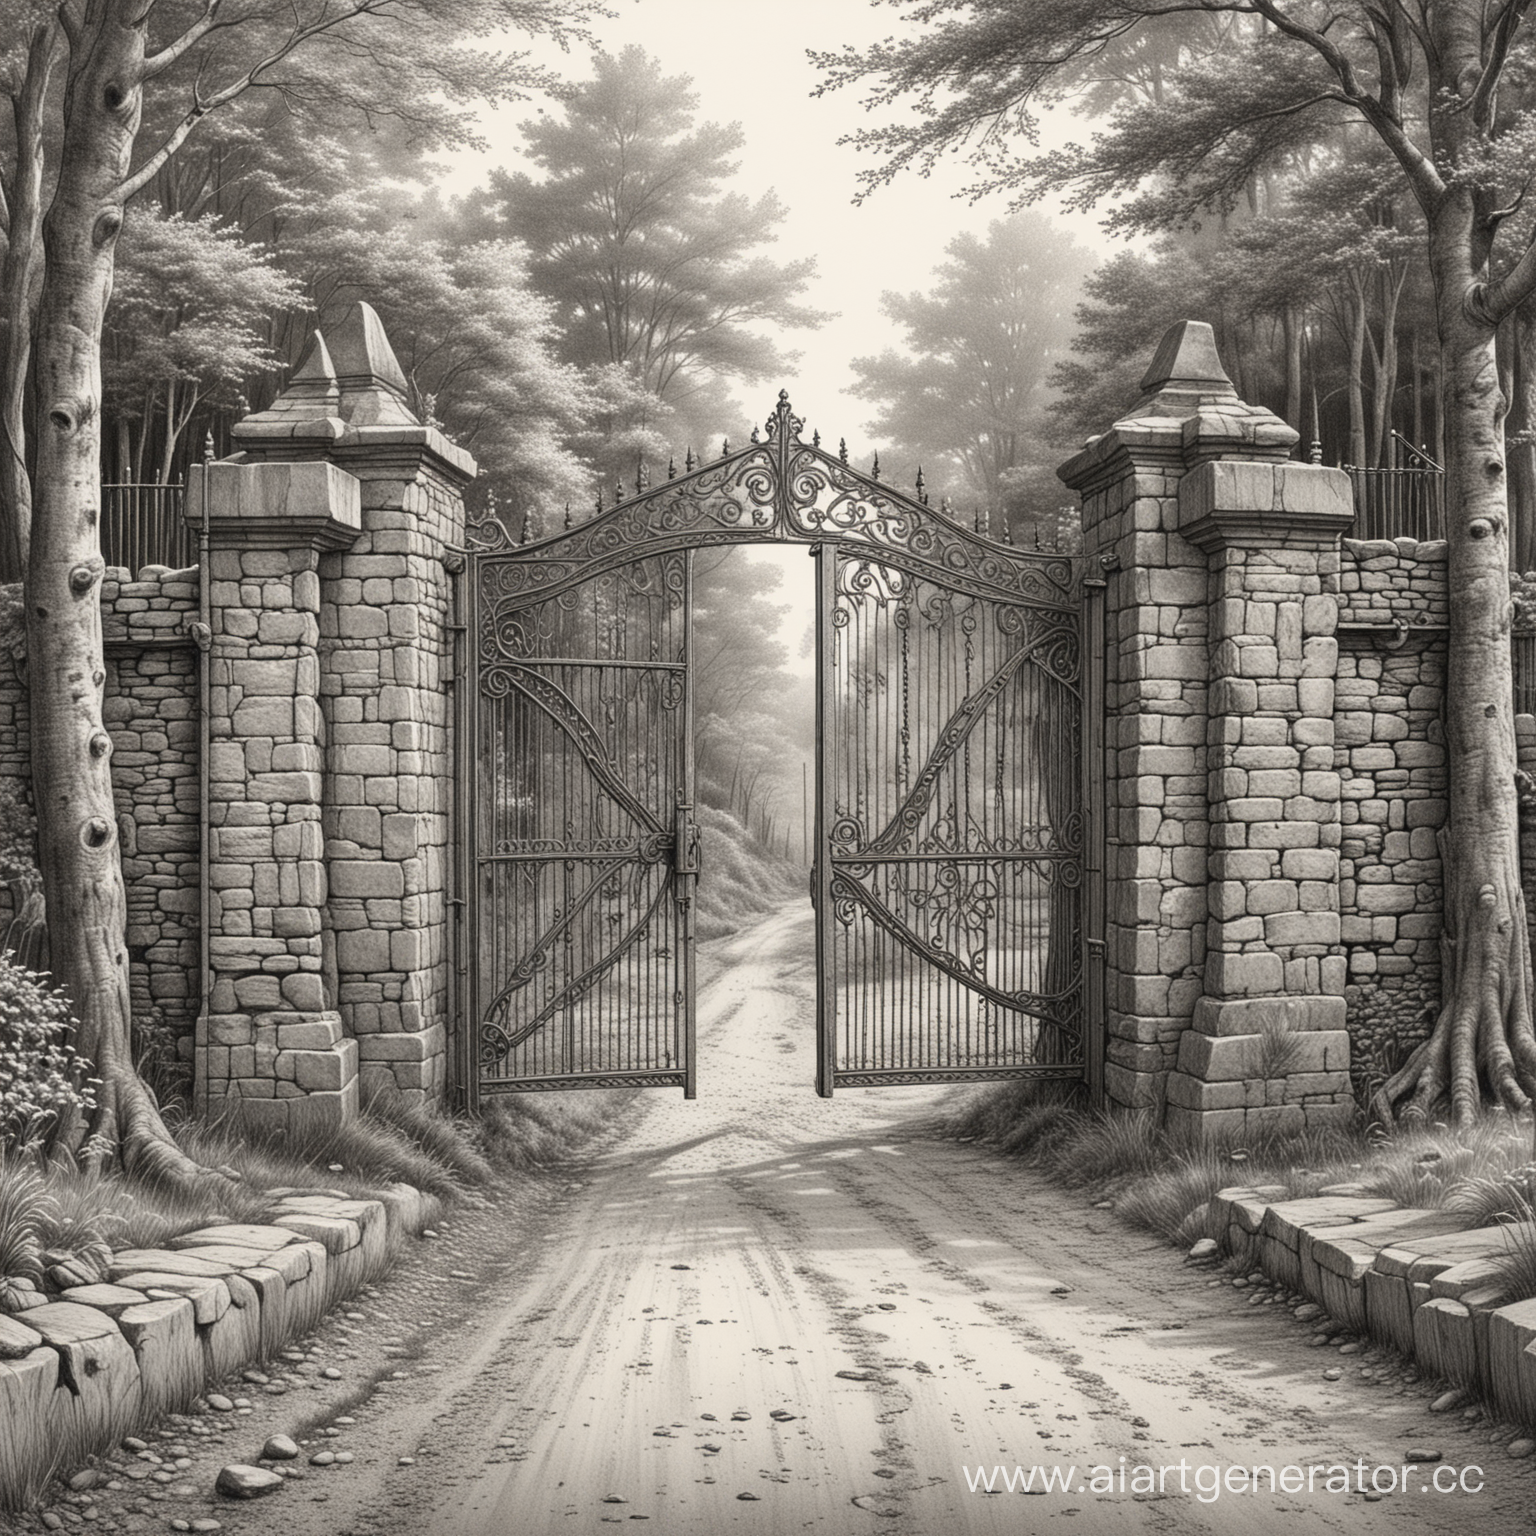 point of vierw on middle ages stylised metal gate with gravel road going forward into forest, detailed pencil sketch